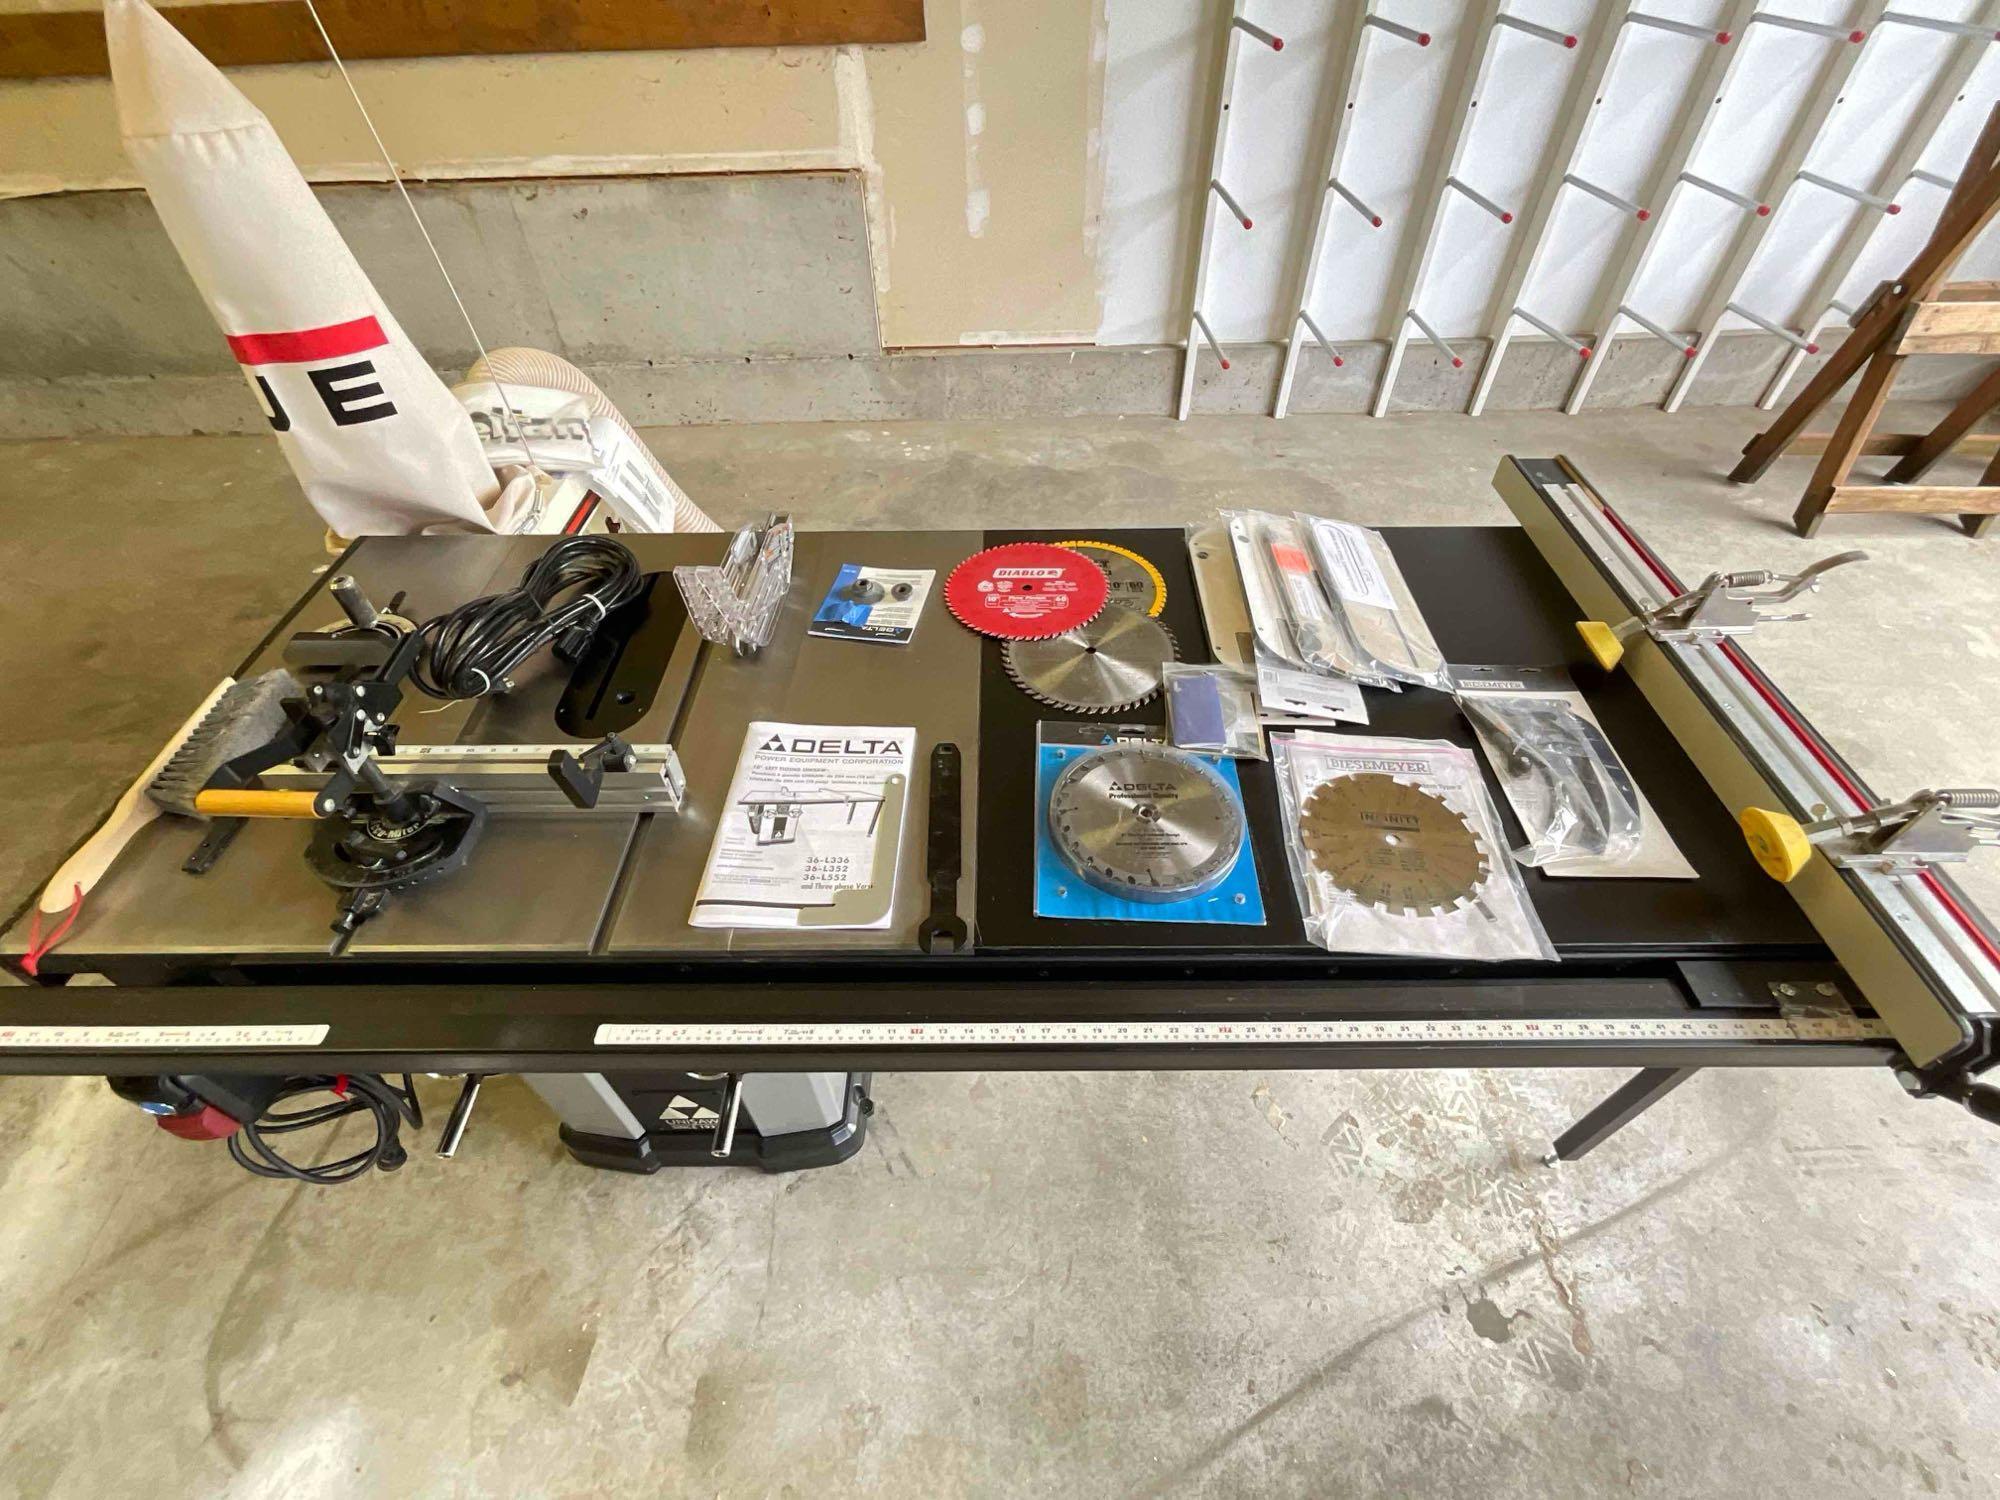 Delta Unisaw 10" 15 amp table saw Model 36-L552 w/ Biesemeyer fence, extrtas & Jet Dust collector